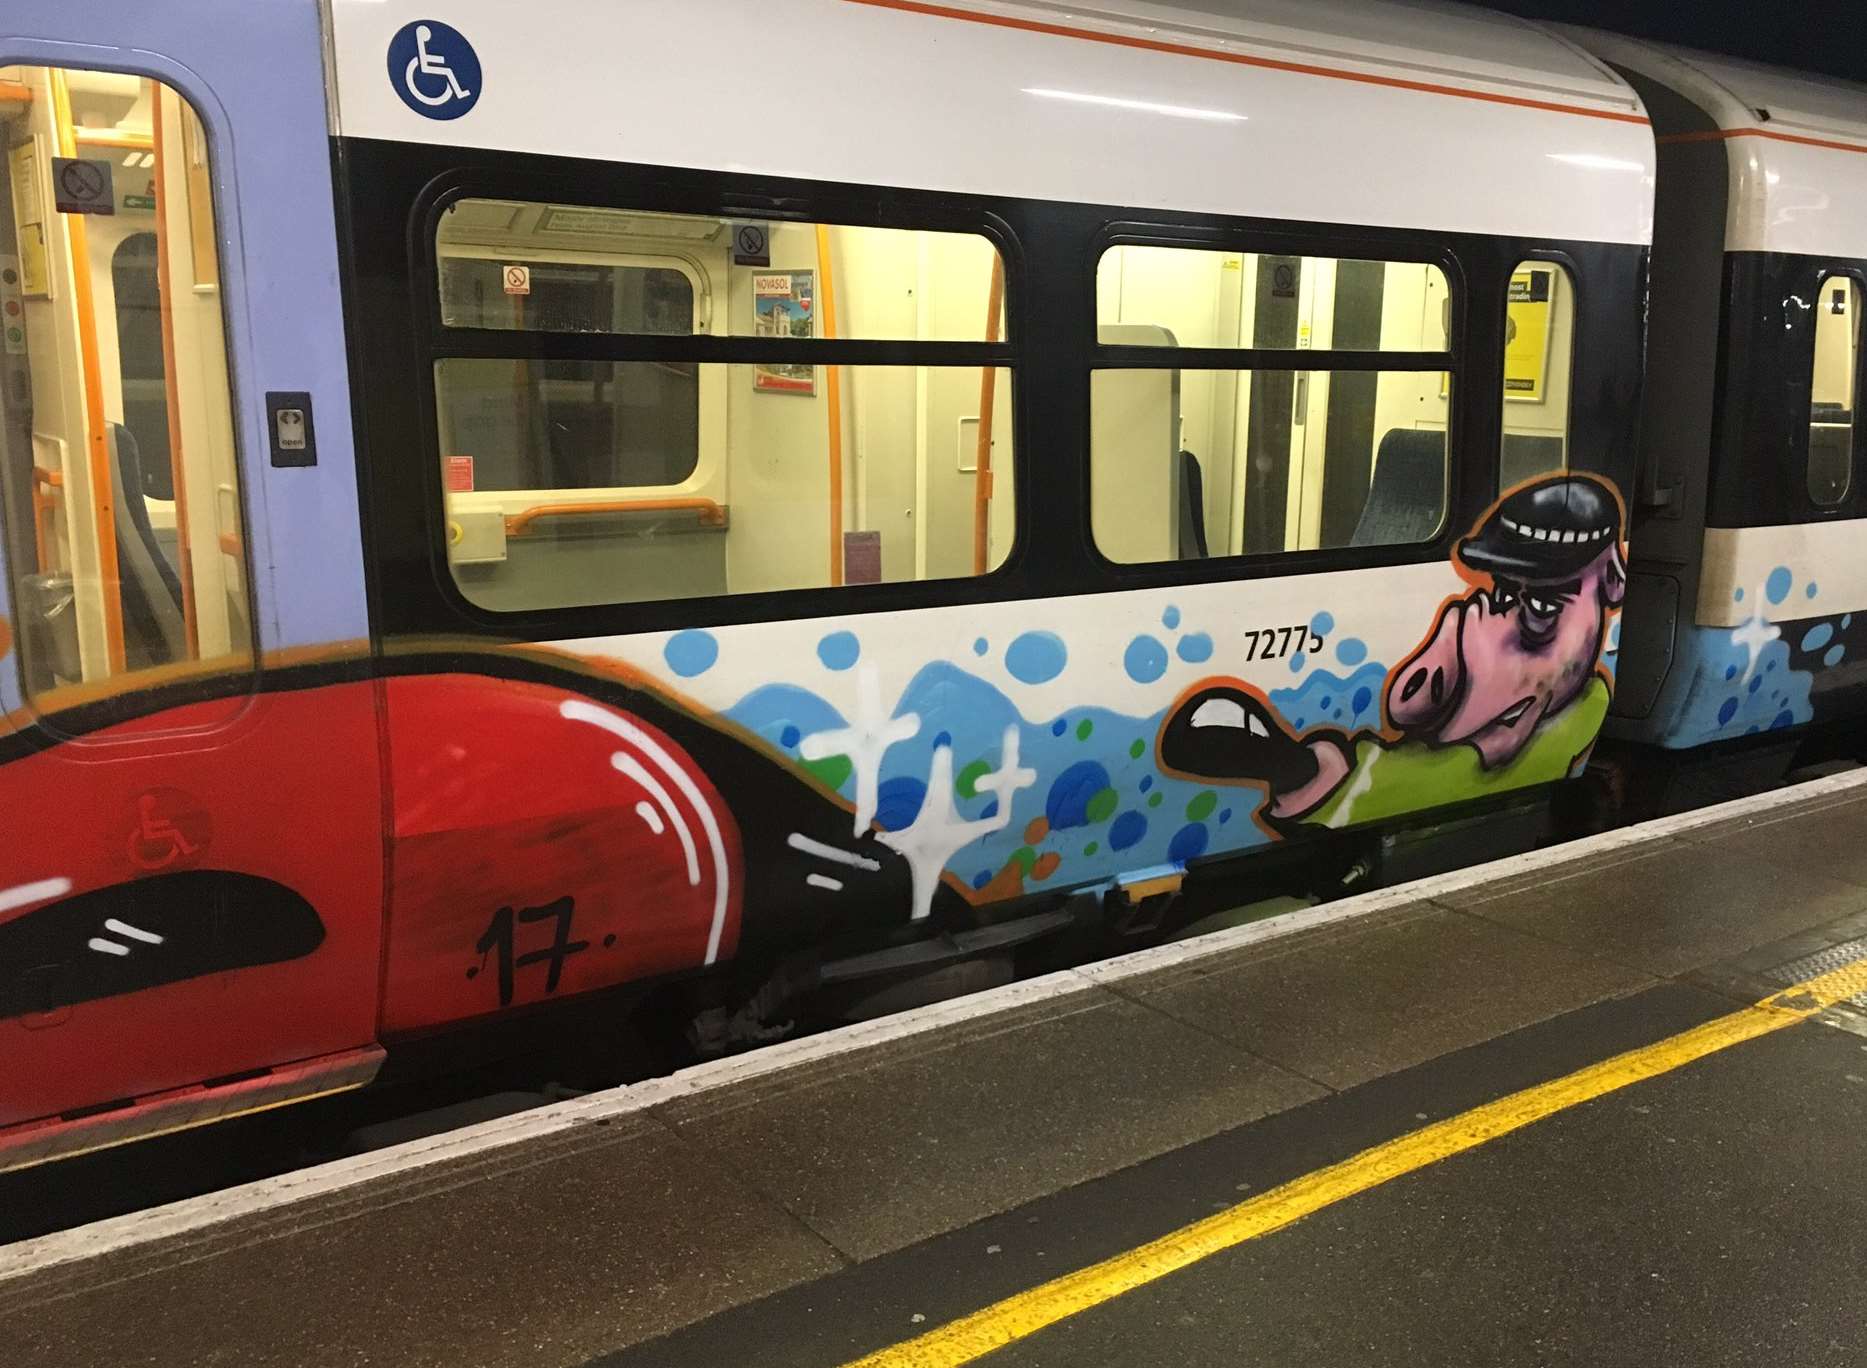 A pig was painted onto the side of one of the carriages. Picture: @TheBigAngryOwl